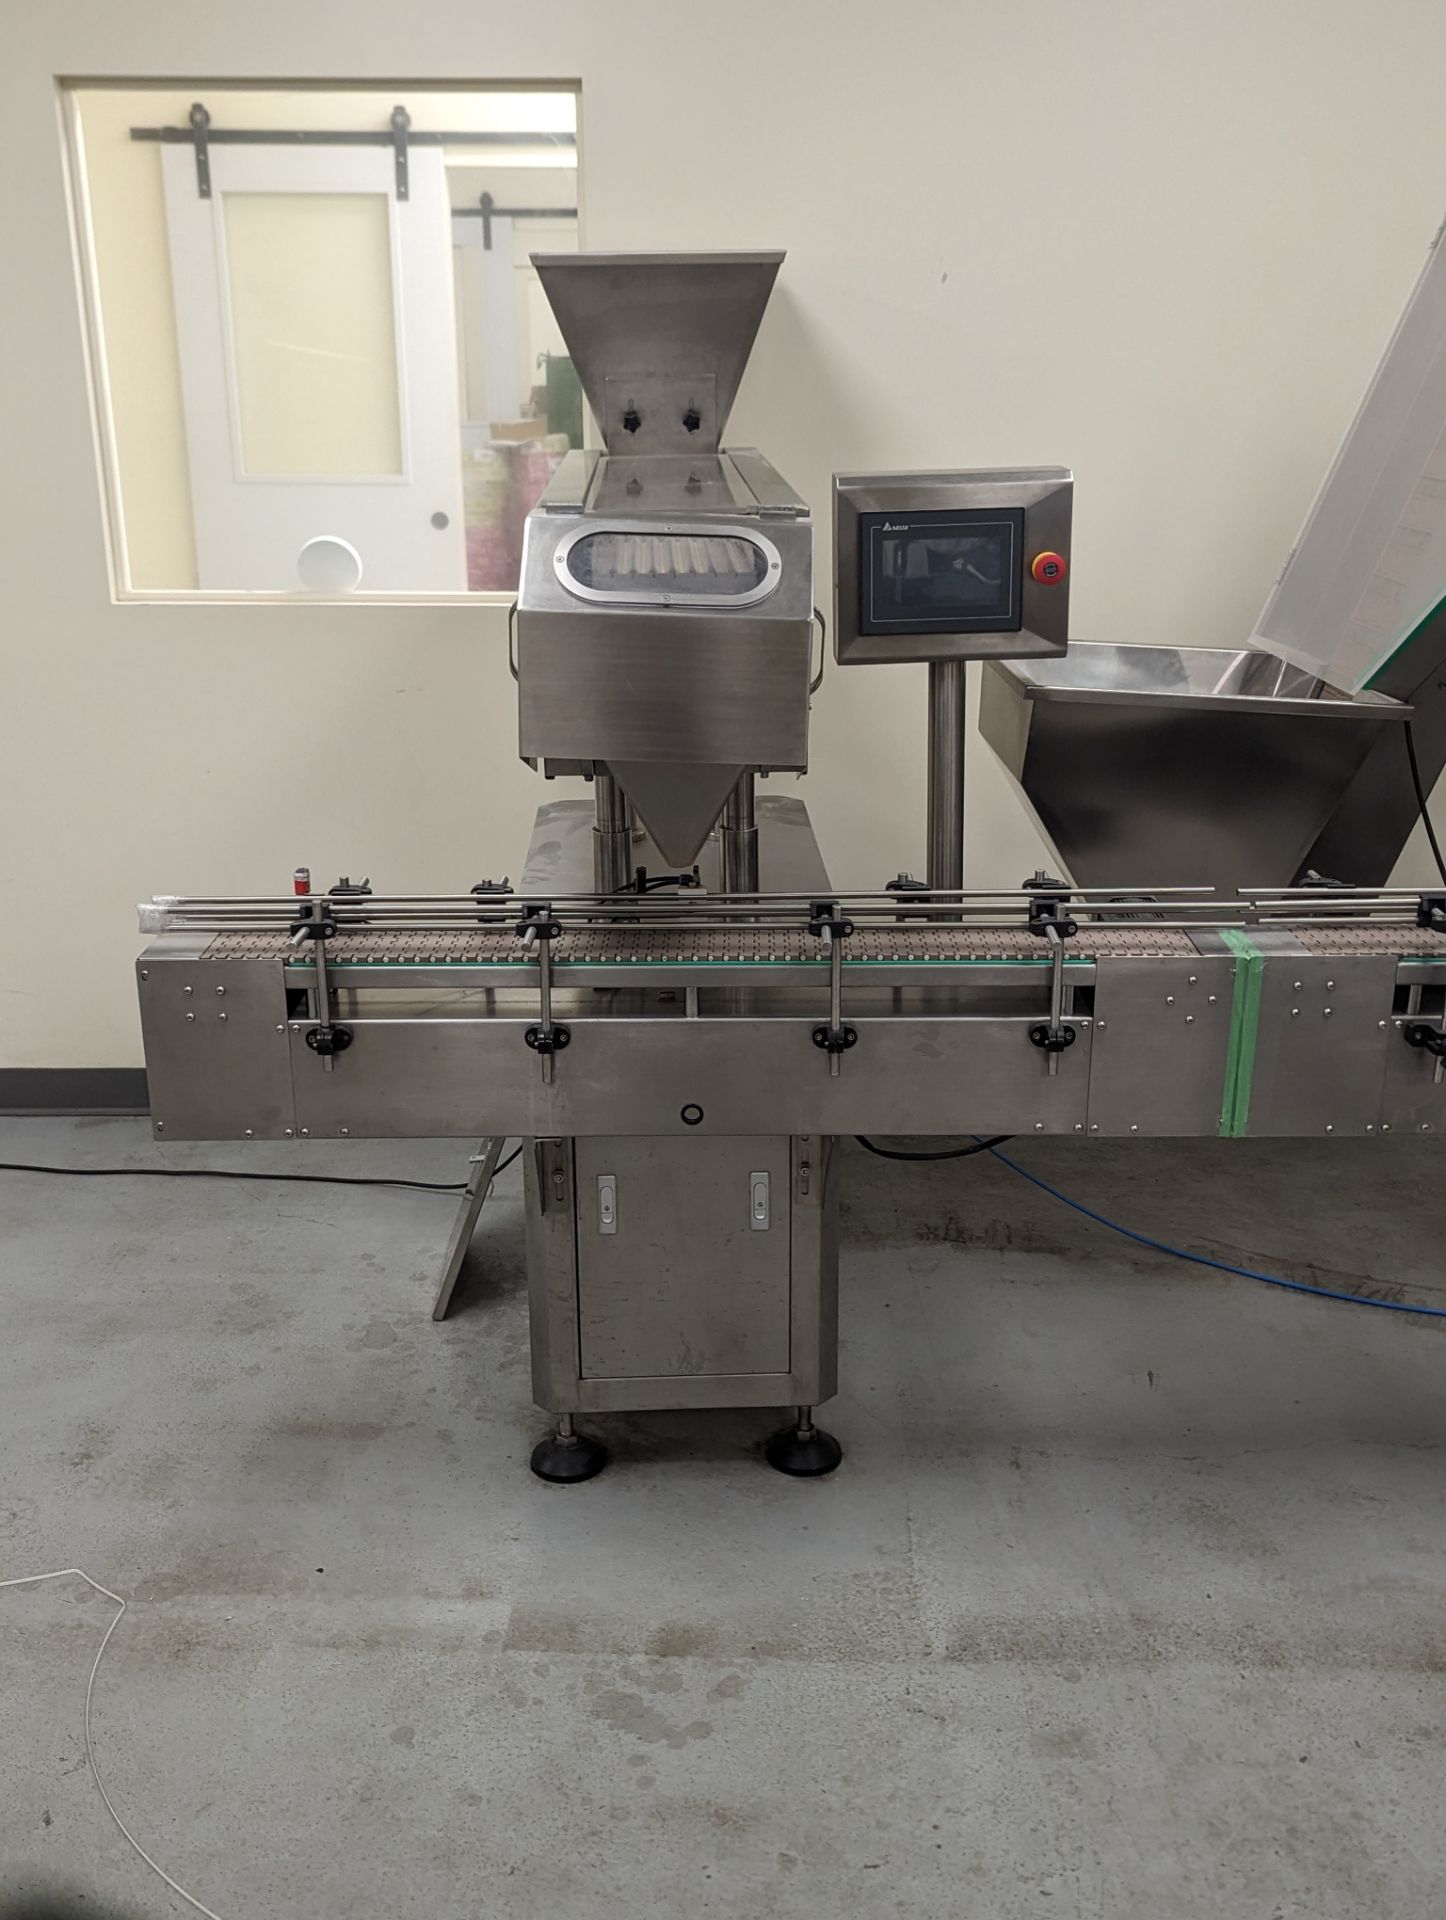 Aligned Packet Filling Machine